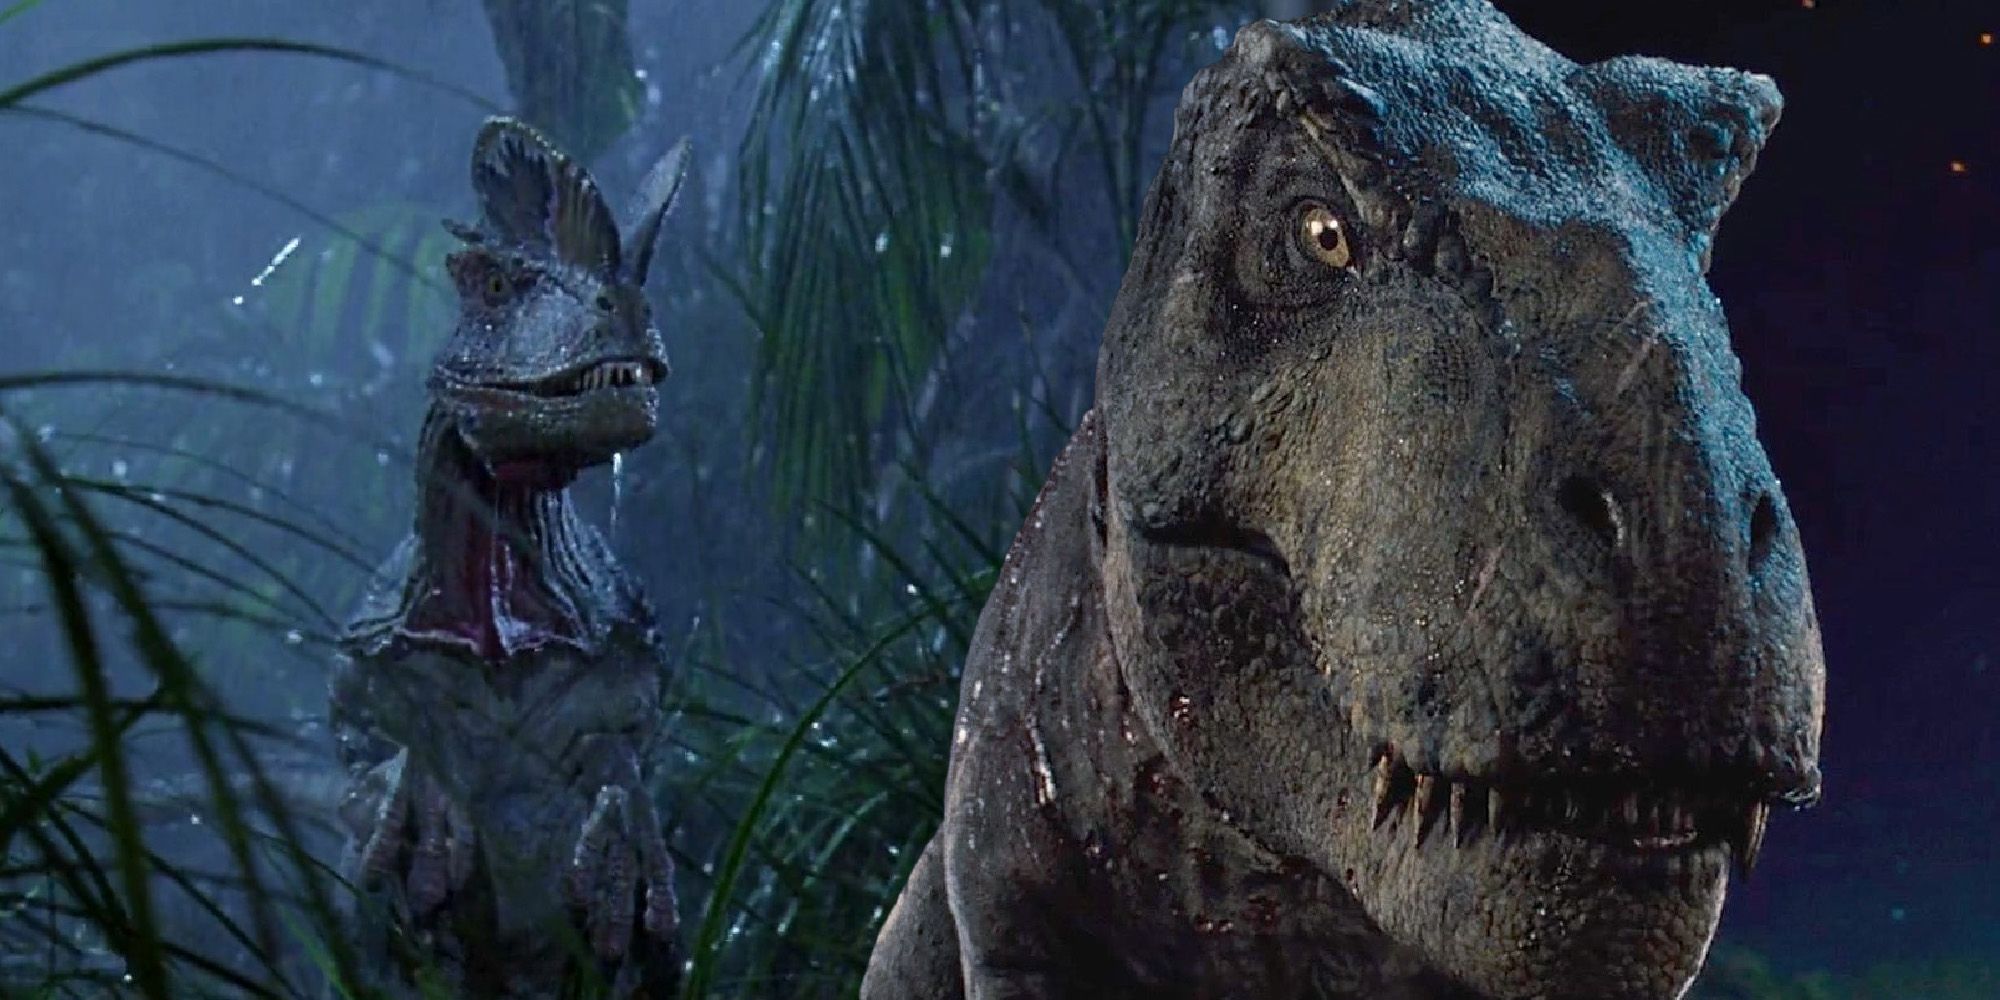 Which Jurassic Park Dinosaurs Are Real And Made Up